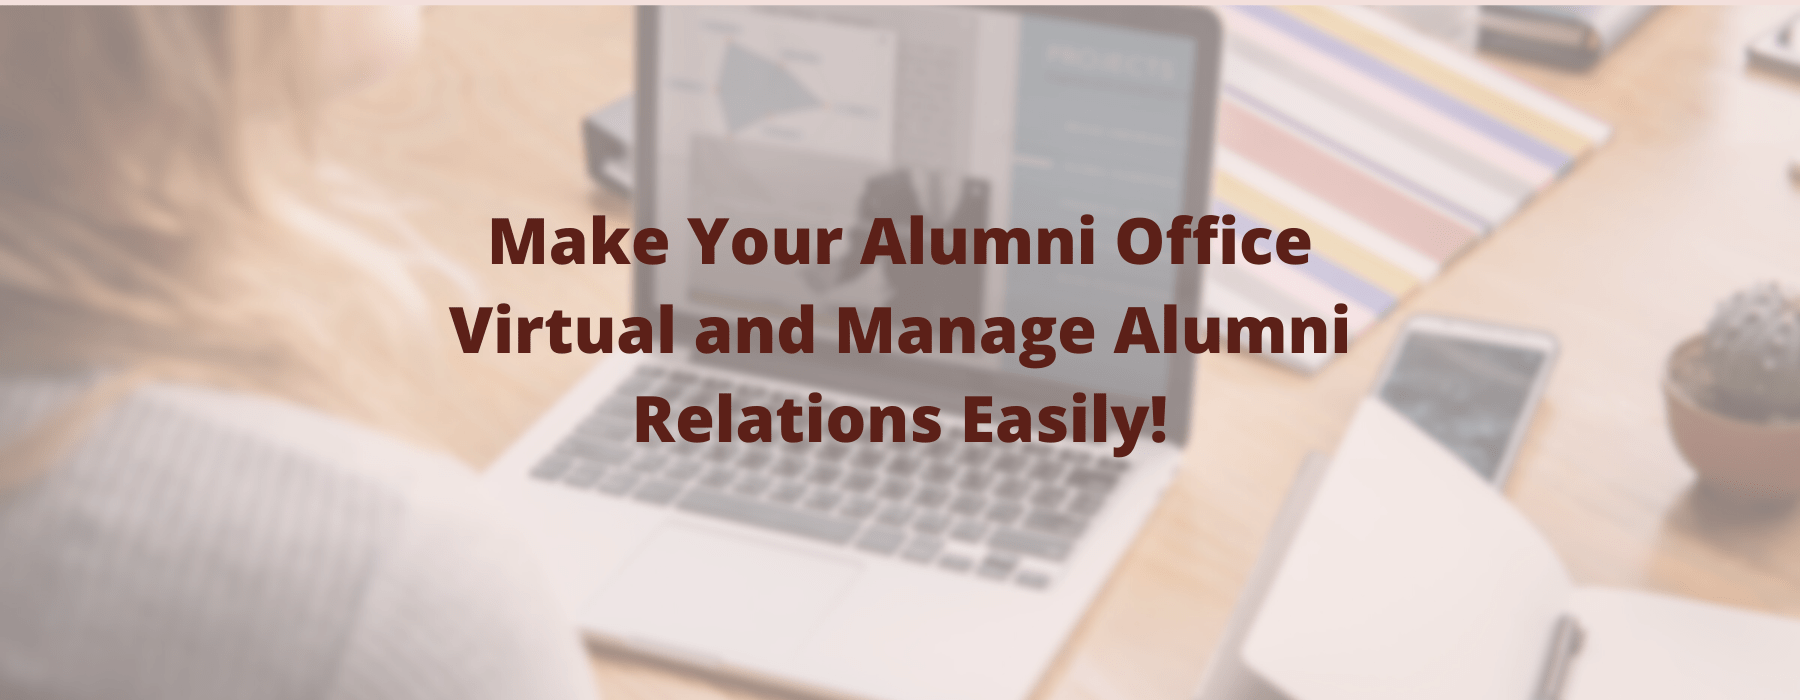 How to Make a Virtual Alumni Office for Your Institution?